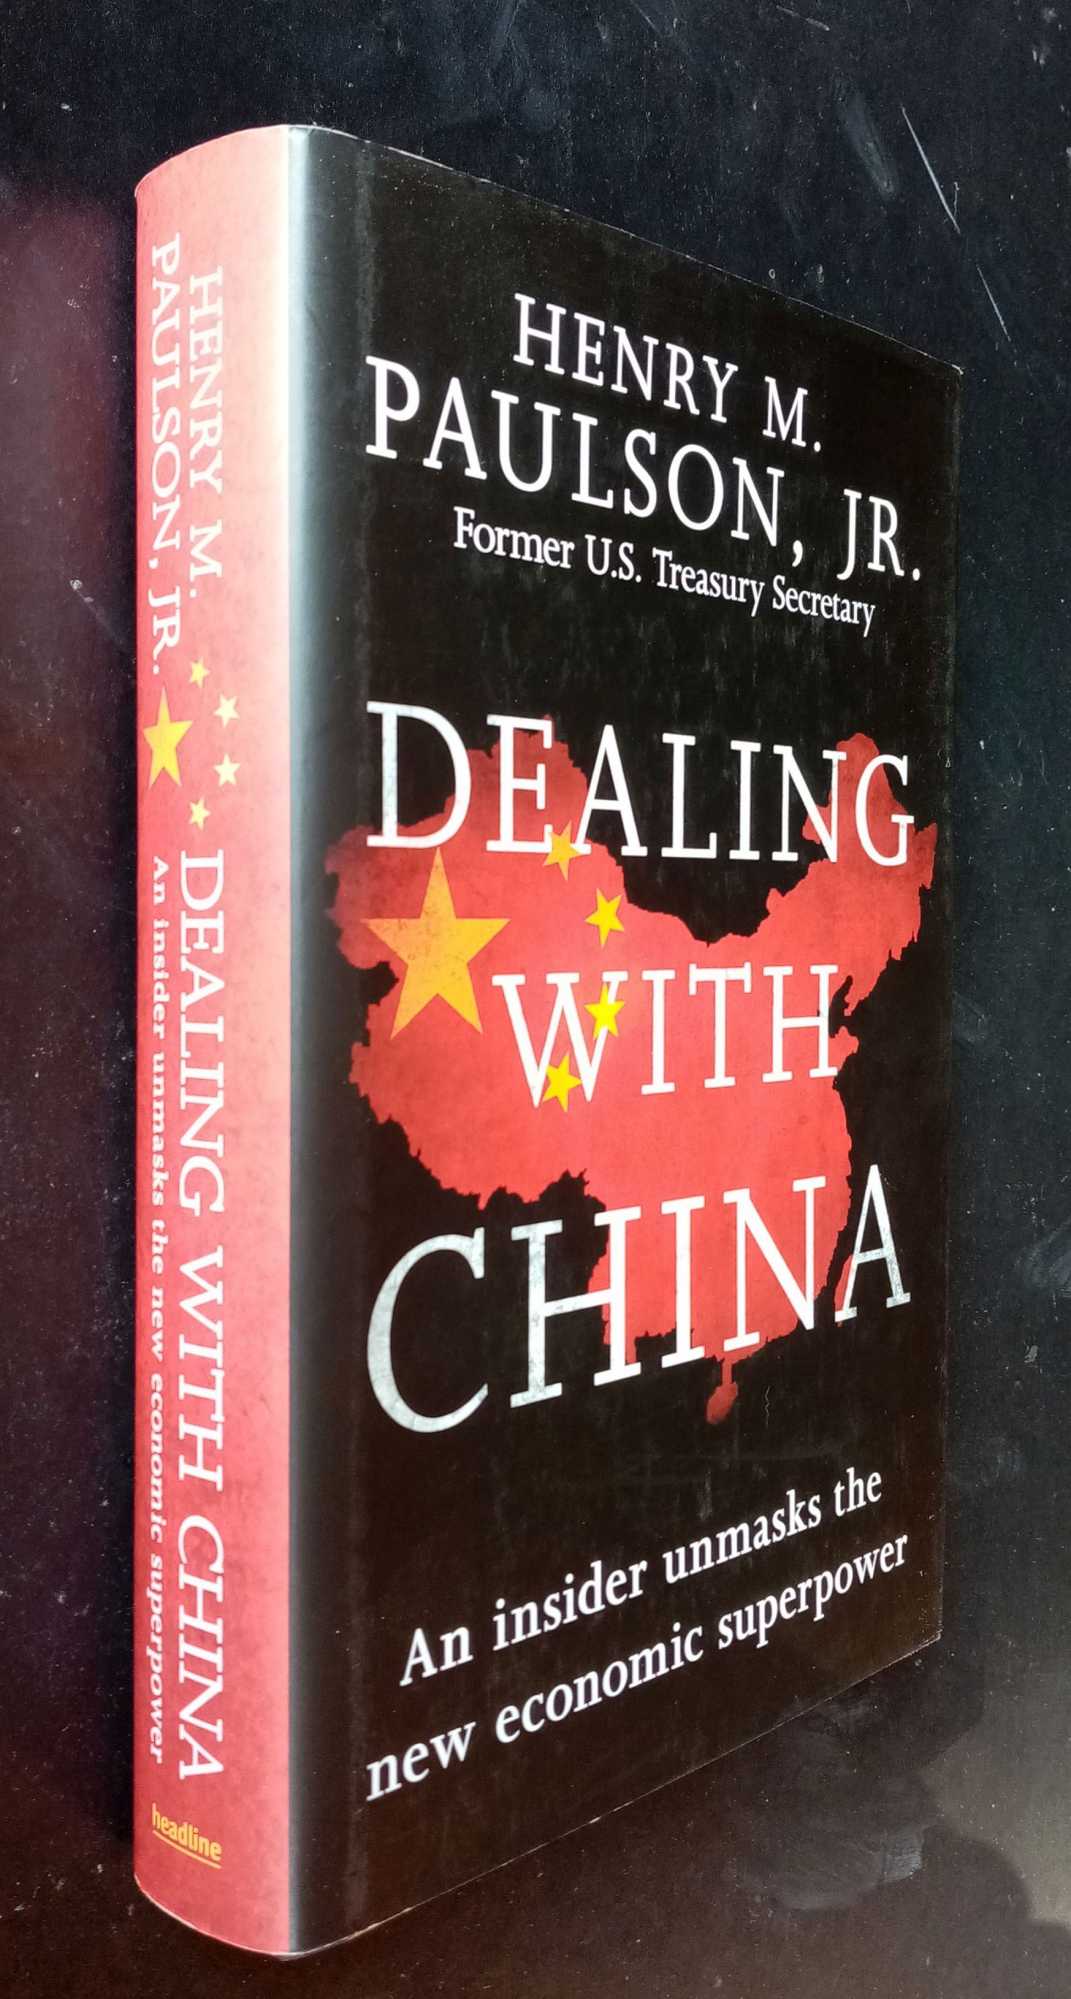 Henry M Poulson - Dealing with China   SIGNED & Inscribed